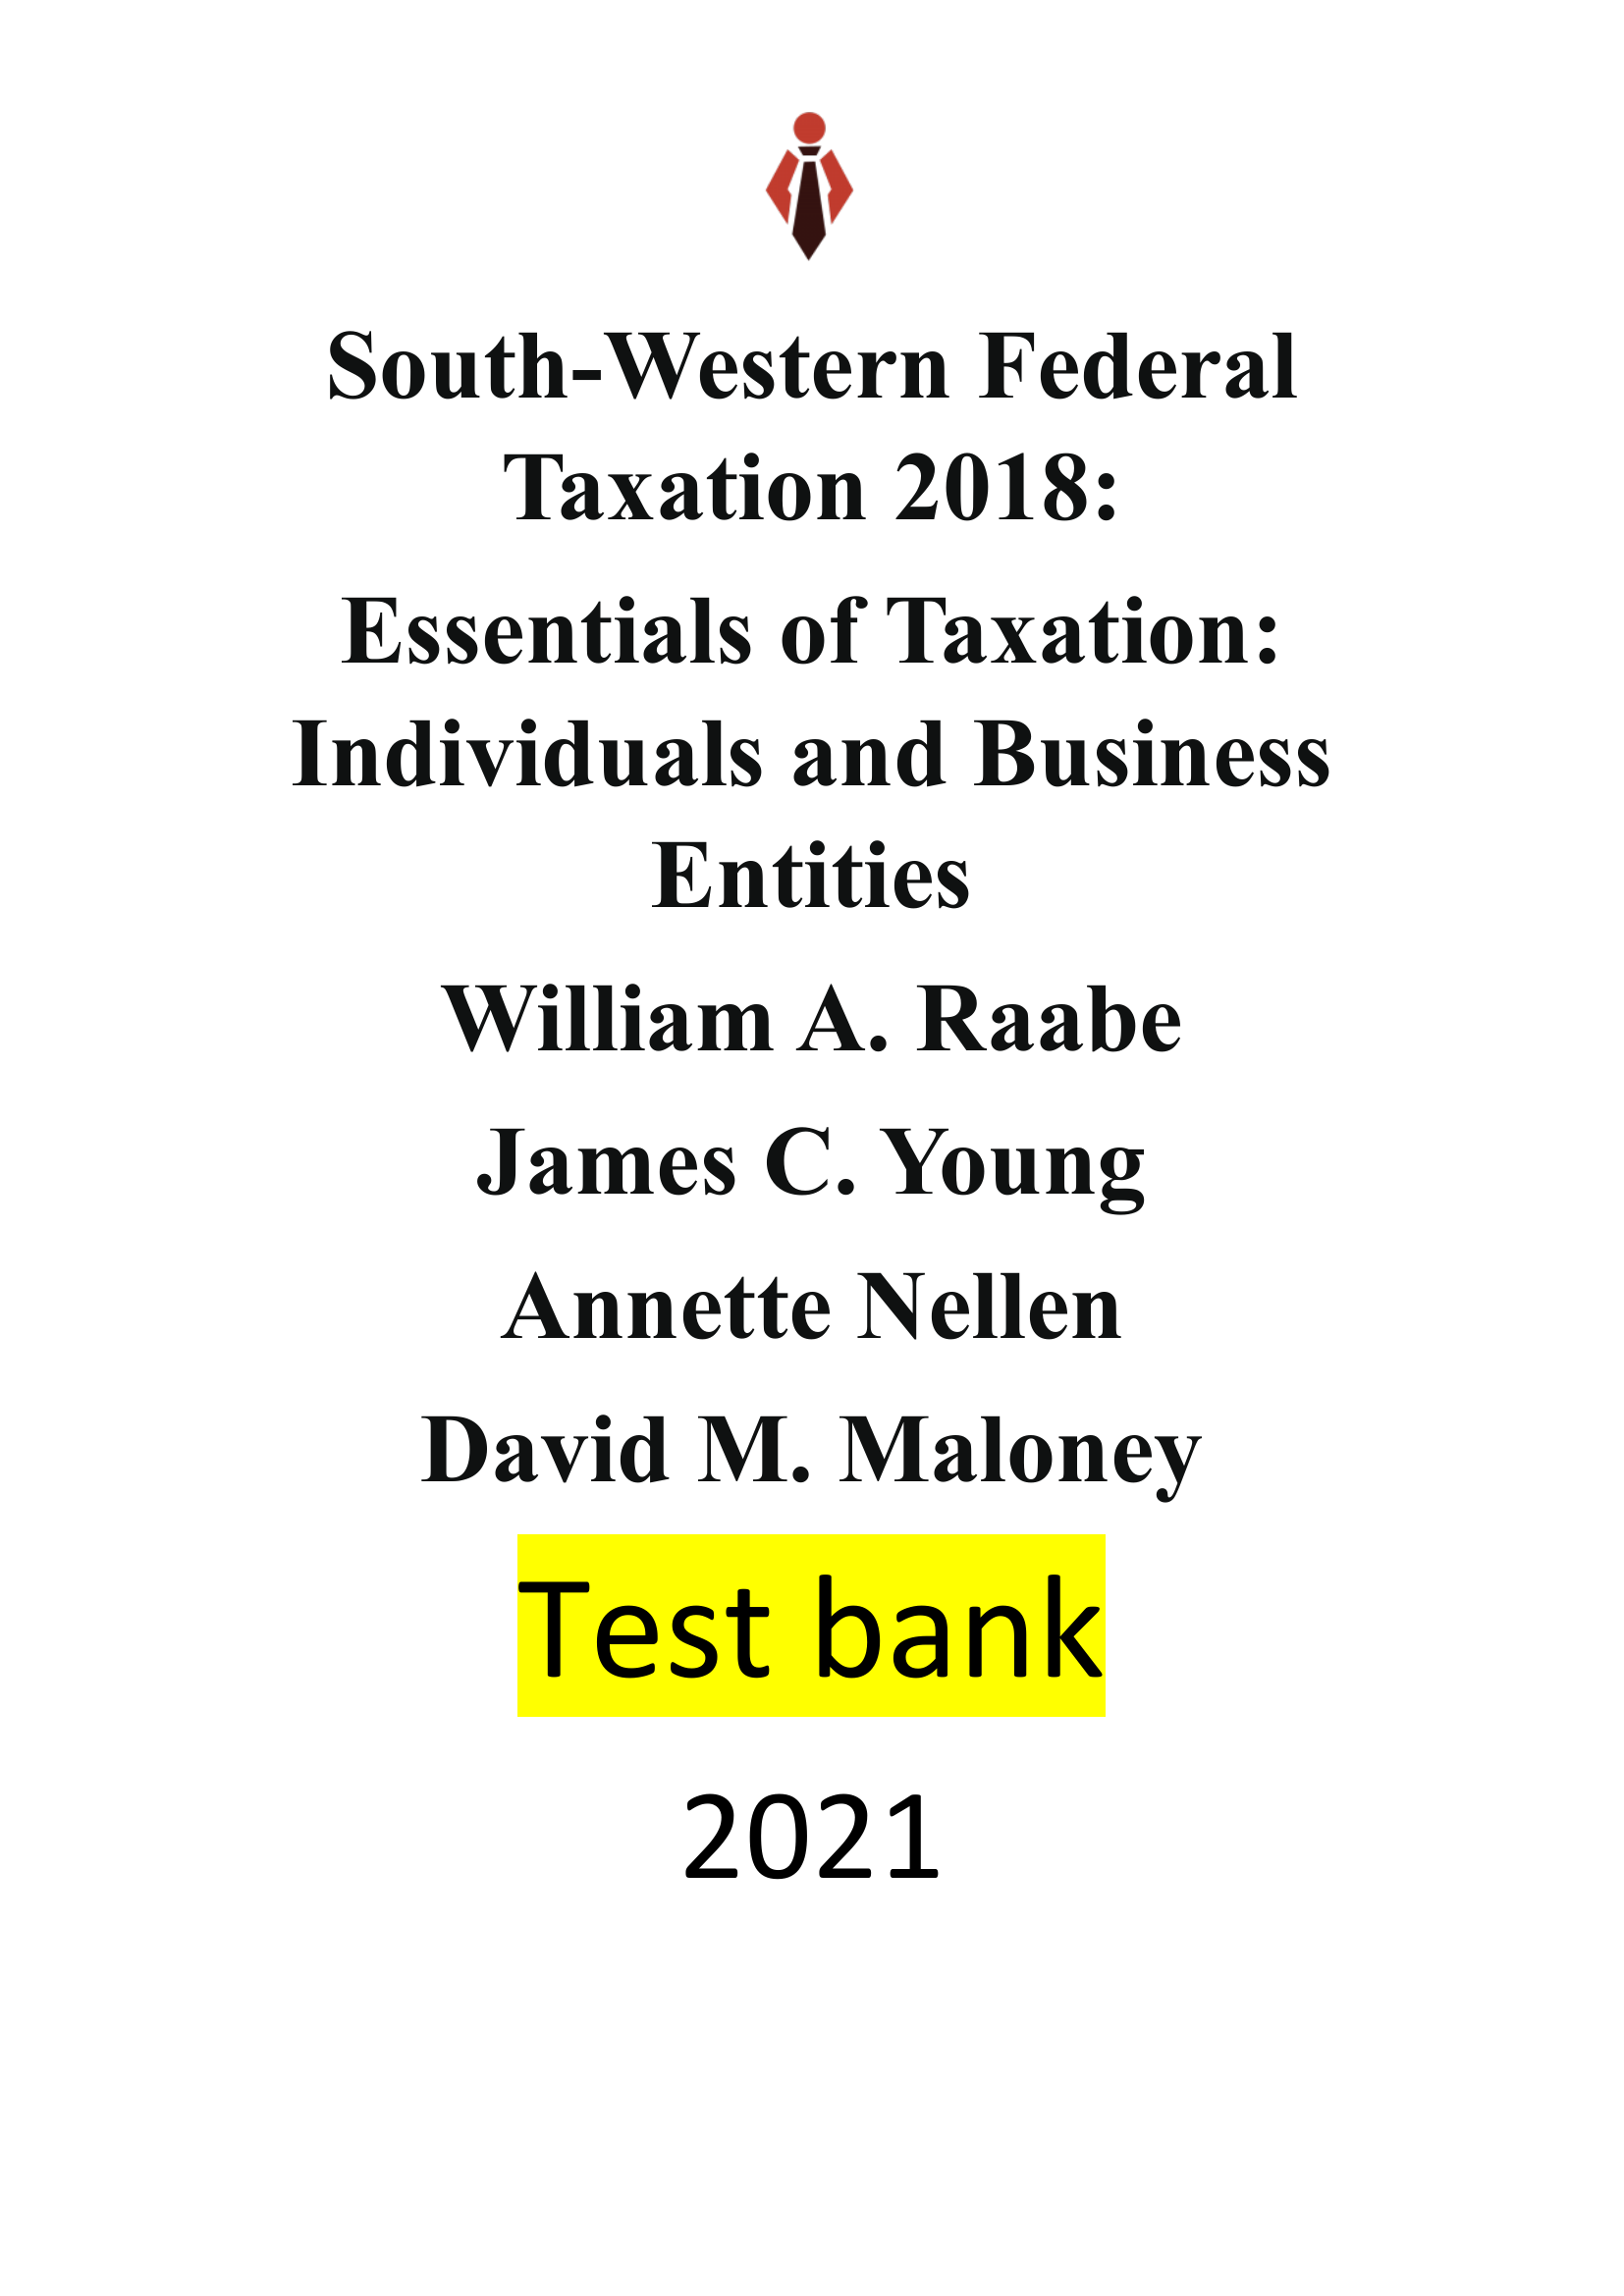 South-Western Federal Taxation 2018 Essentials Of Taxation Individuals And Business Entities